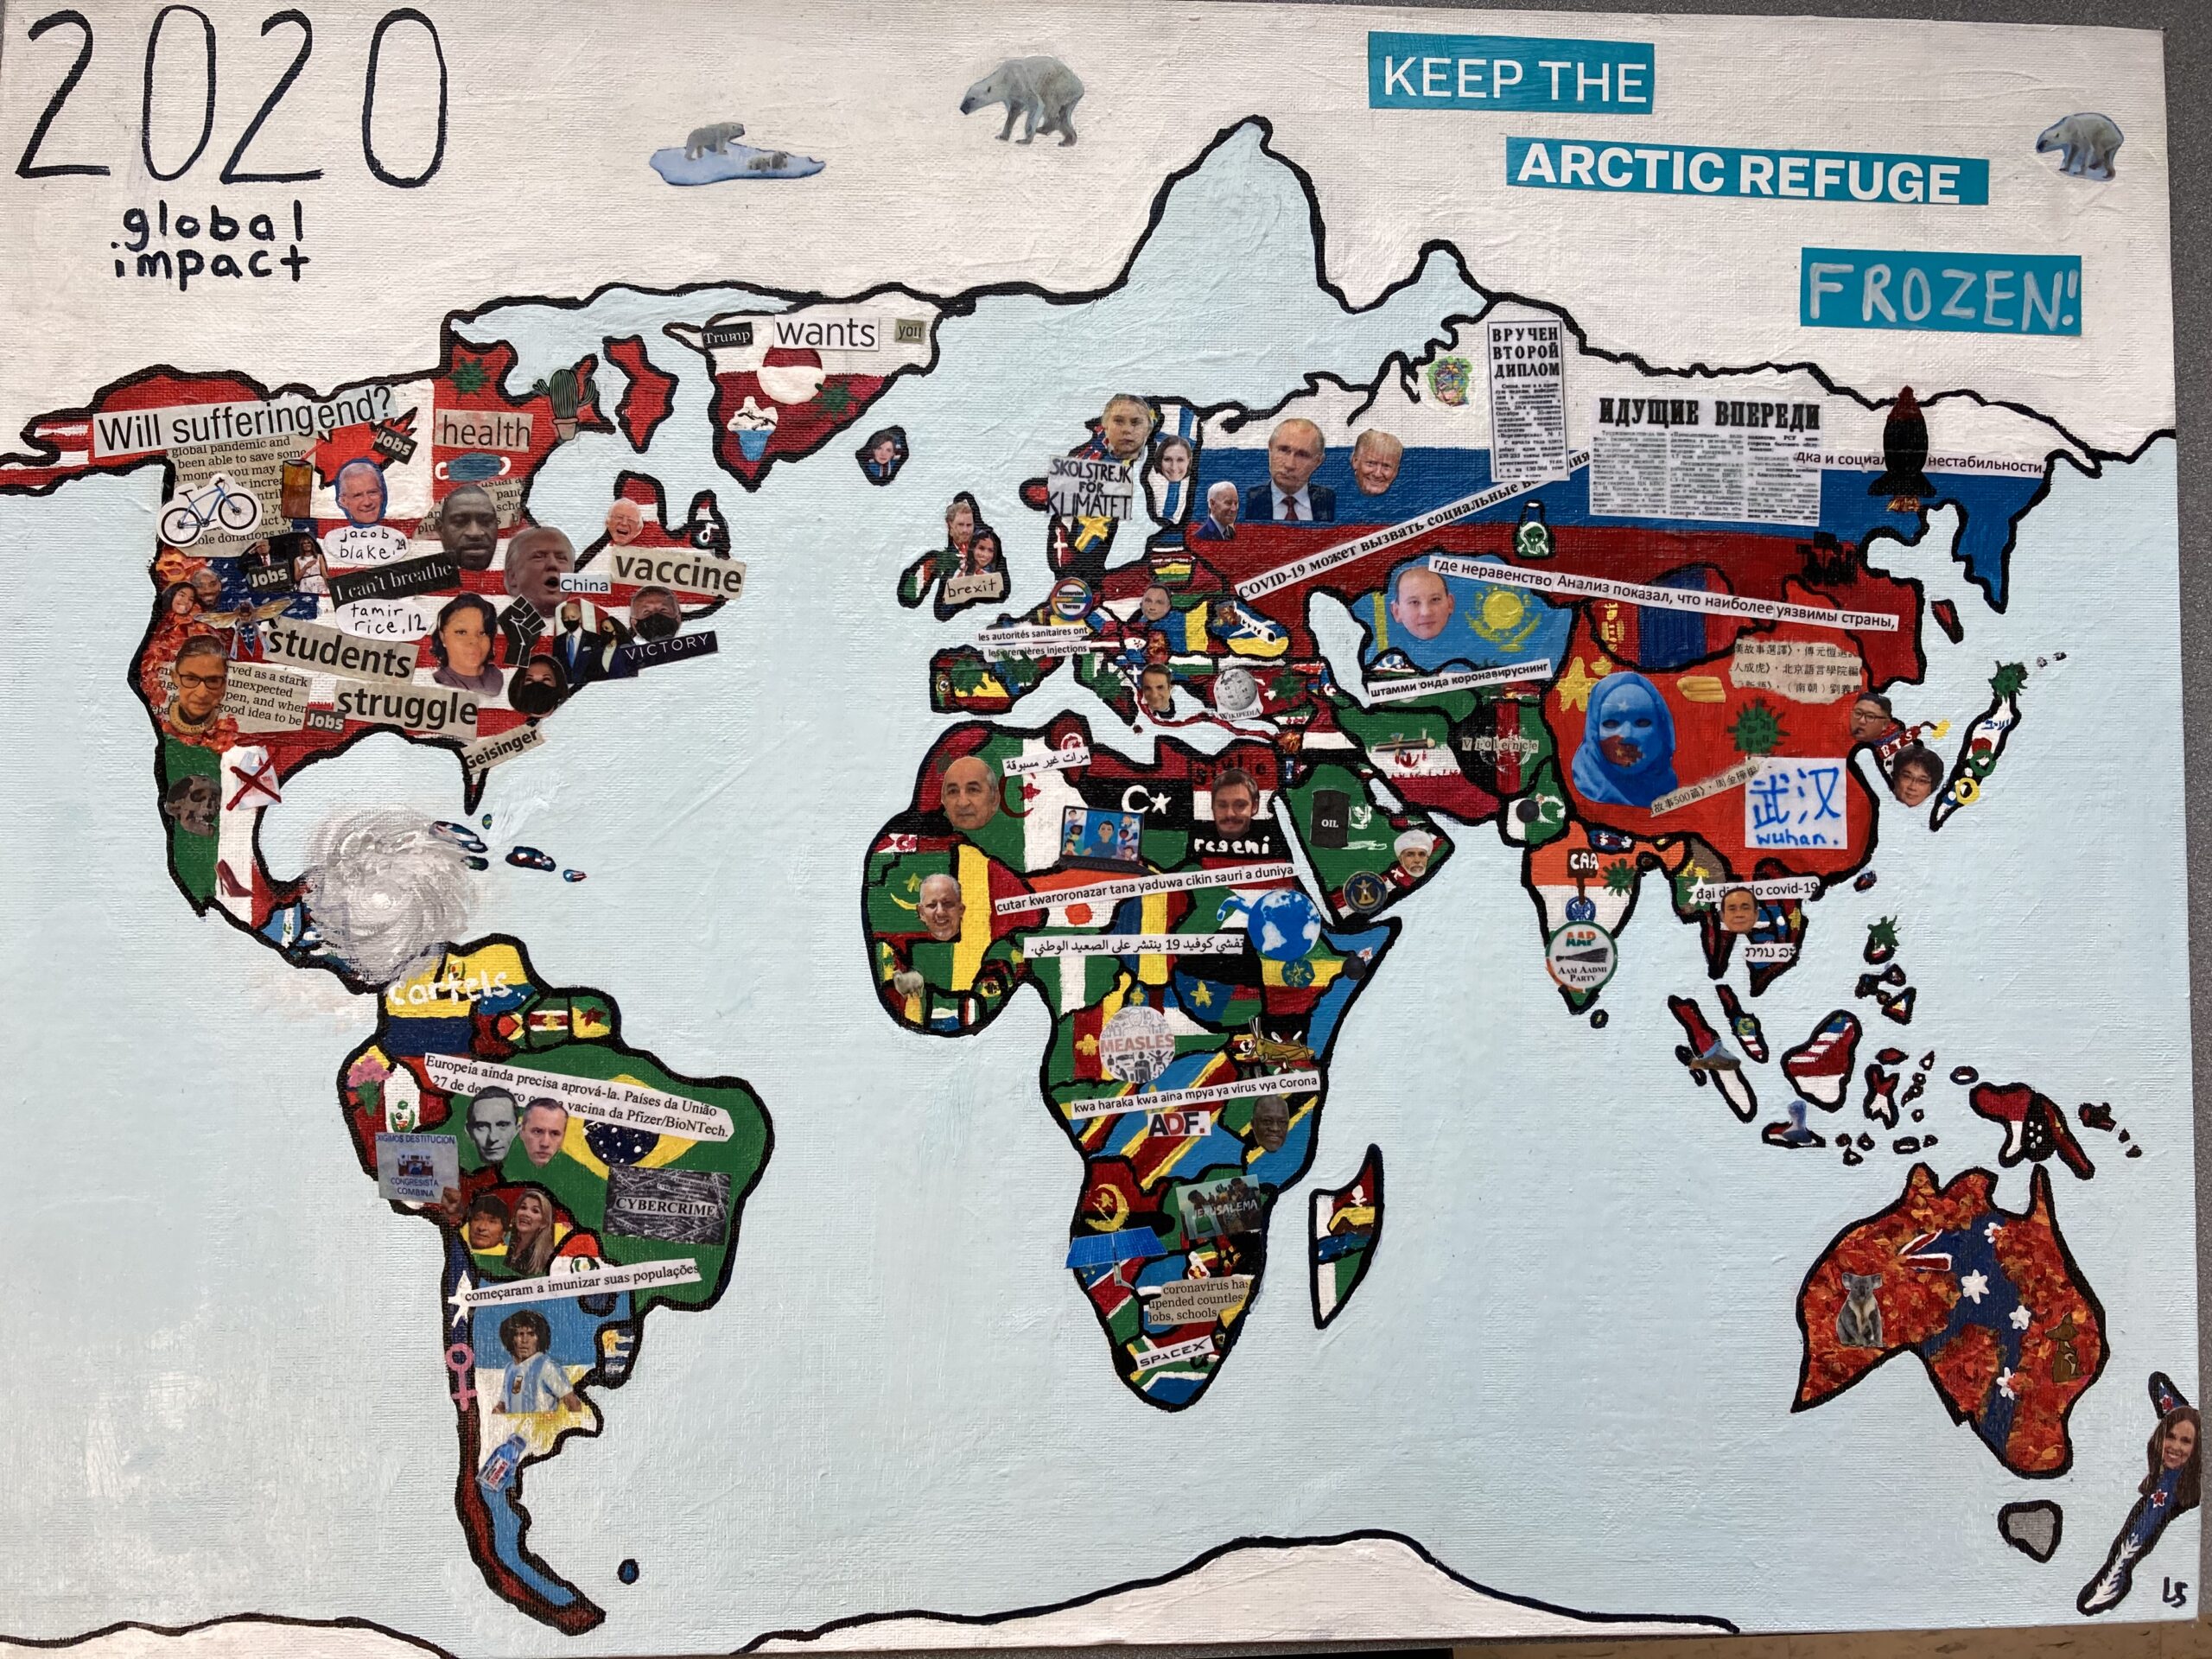 This image is a world map collaged with text and images of politcal figures and events that took place throughout 2020.